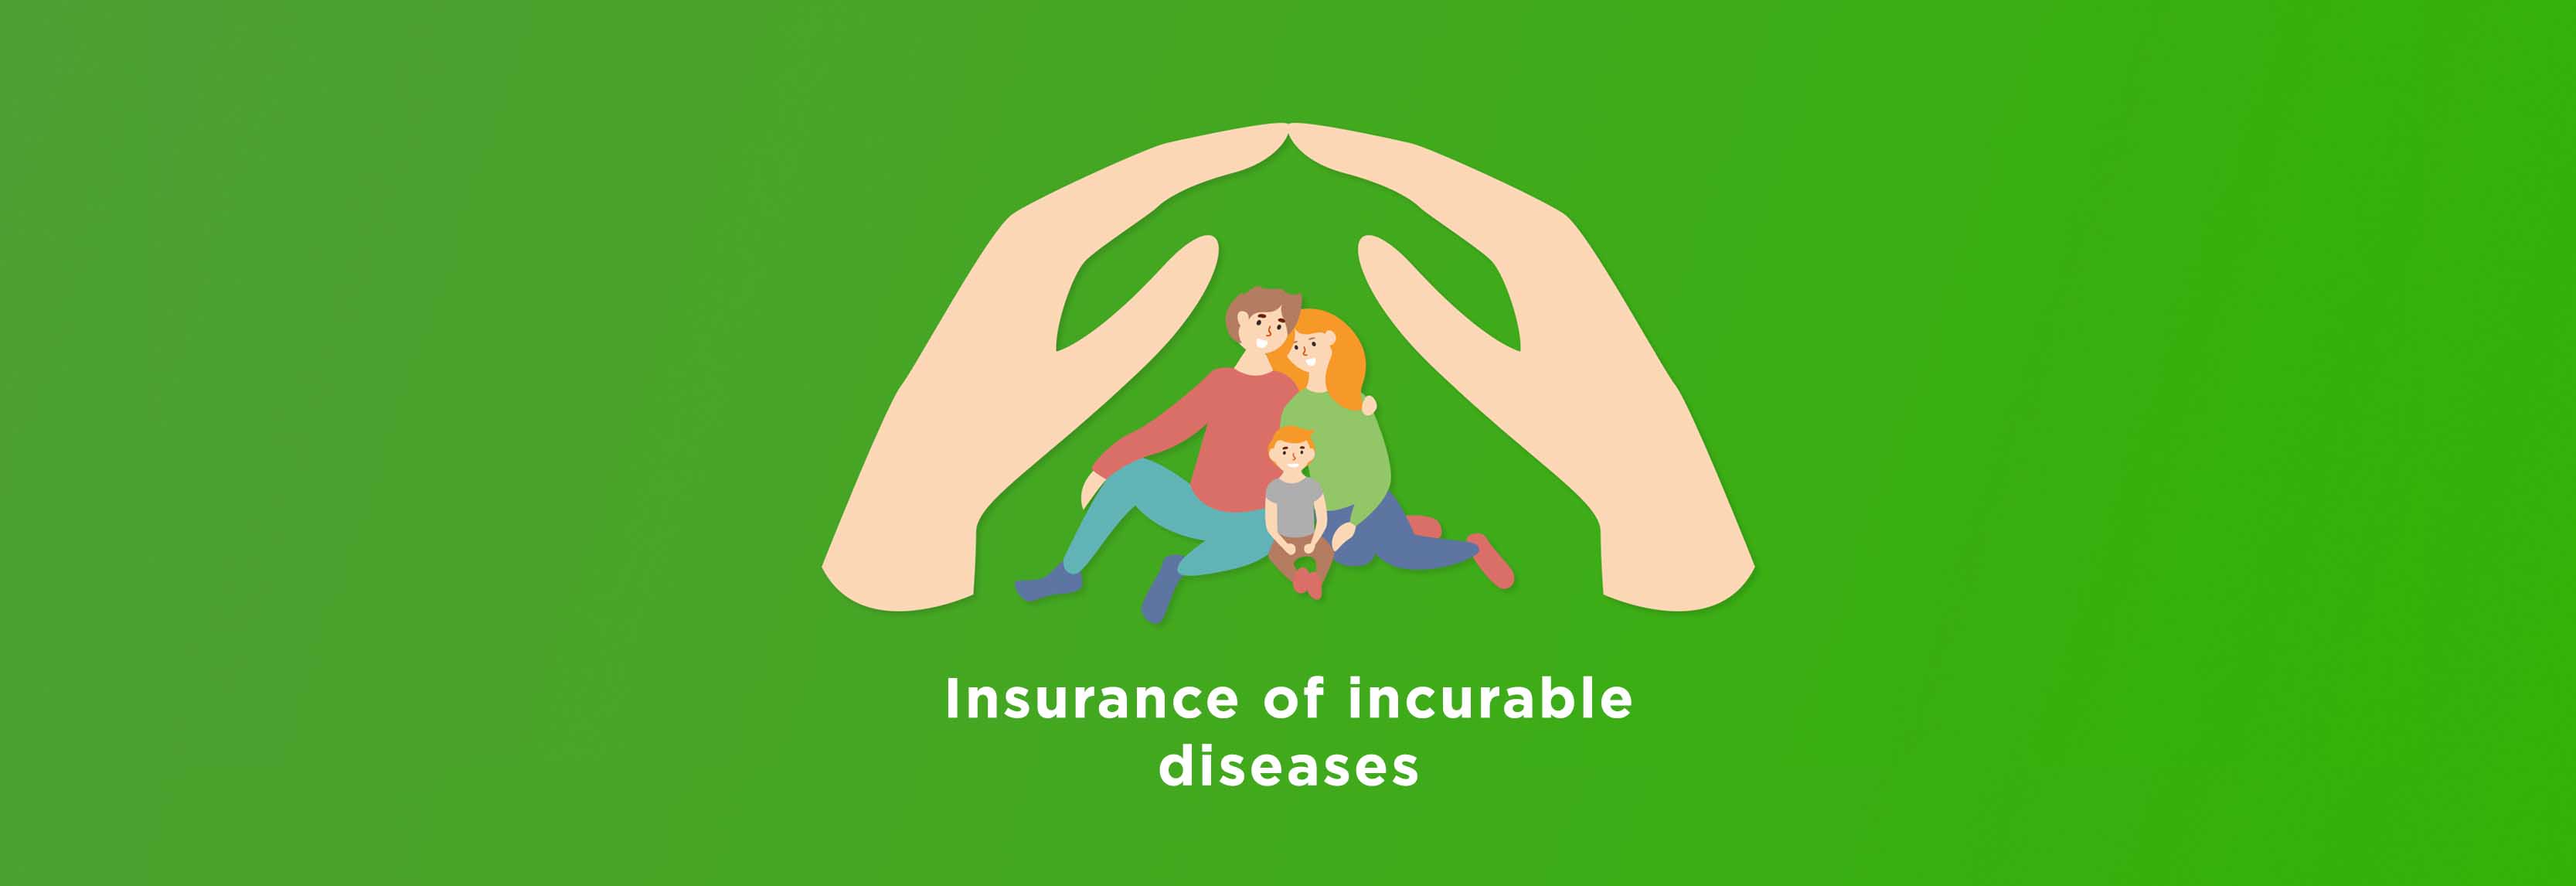 INSURANCE OF INCURABLE DISEASES